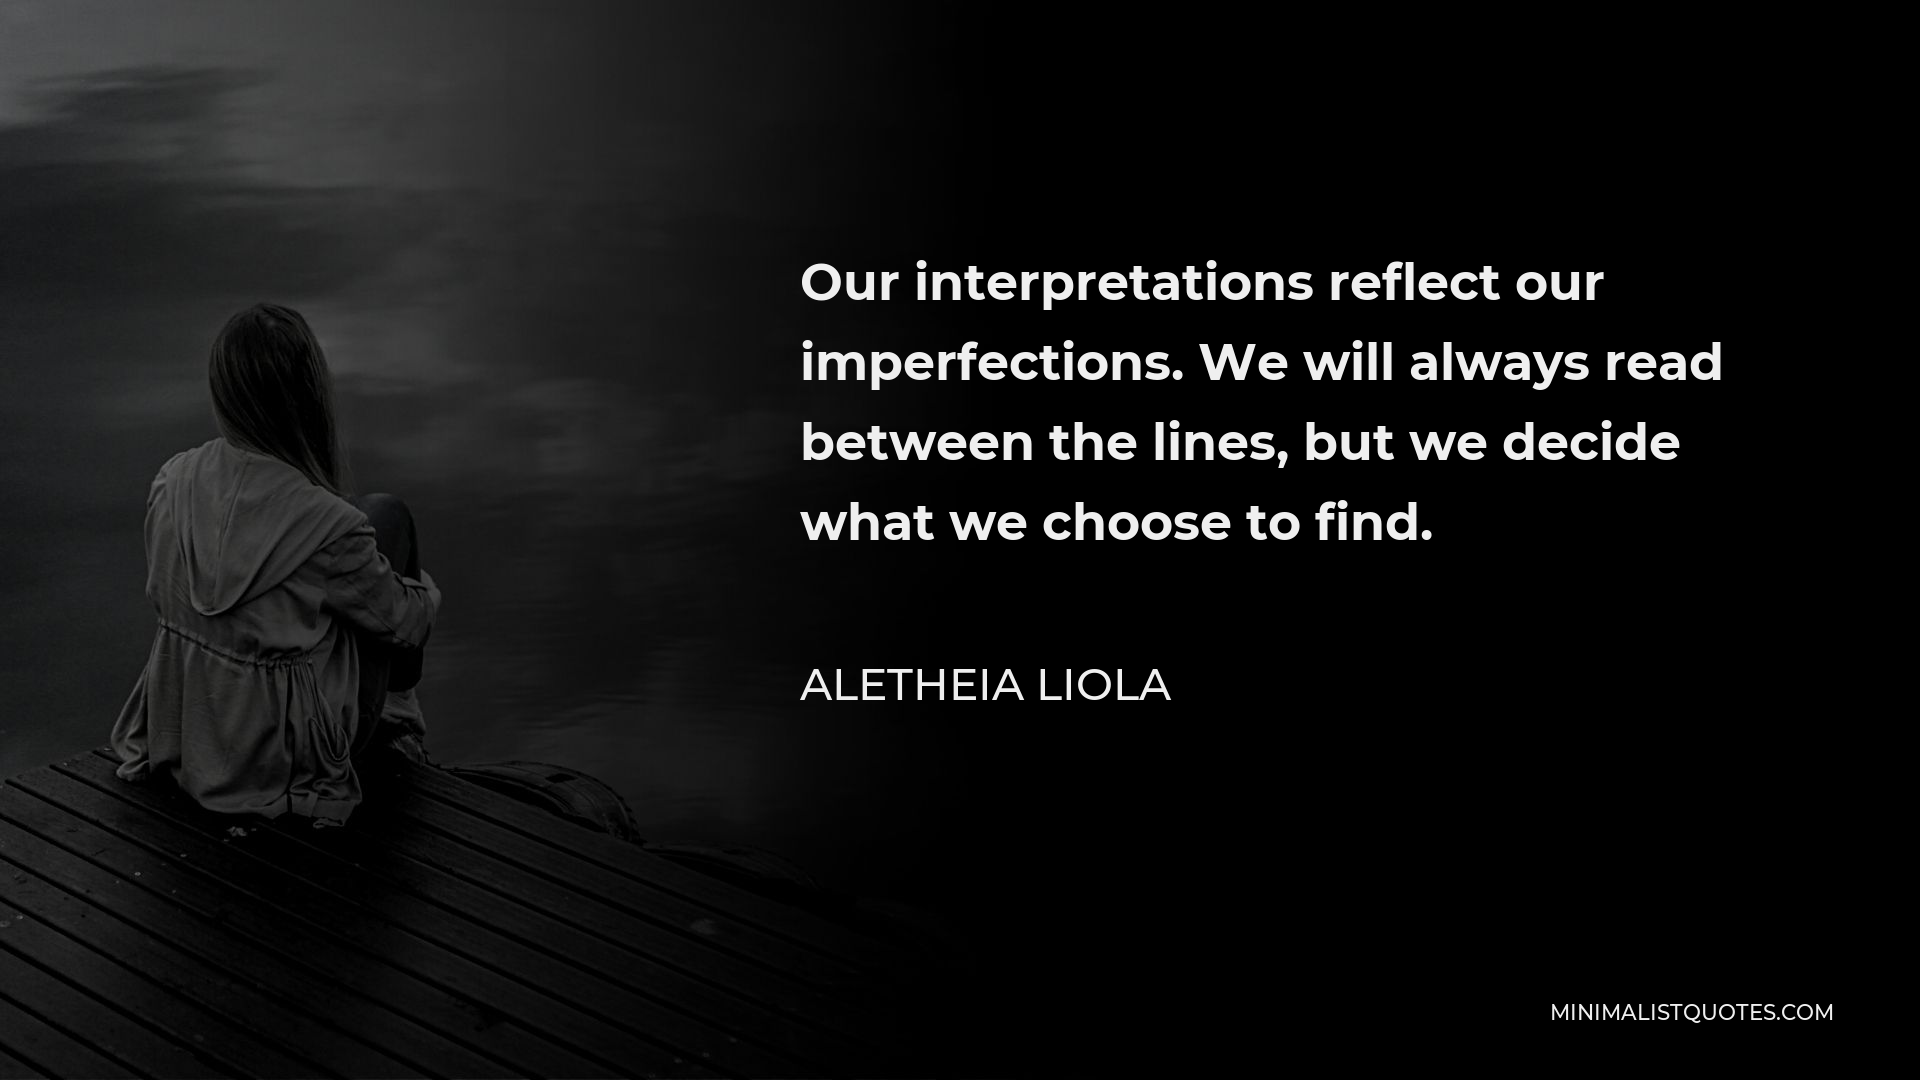 Aletheia Liola Quote - Our interpretations reflect our imperfections. We will always read between the lines, but we decide what we choose to find.